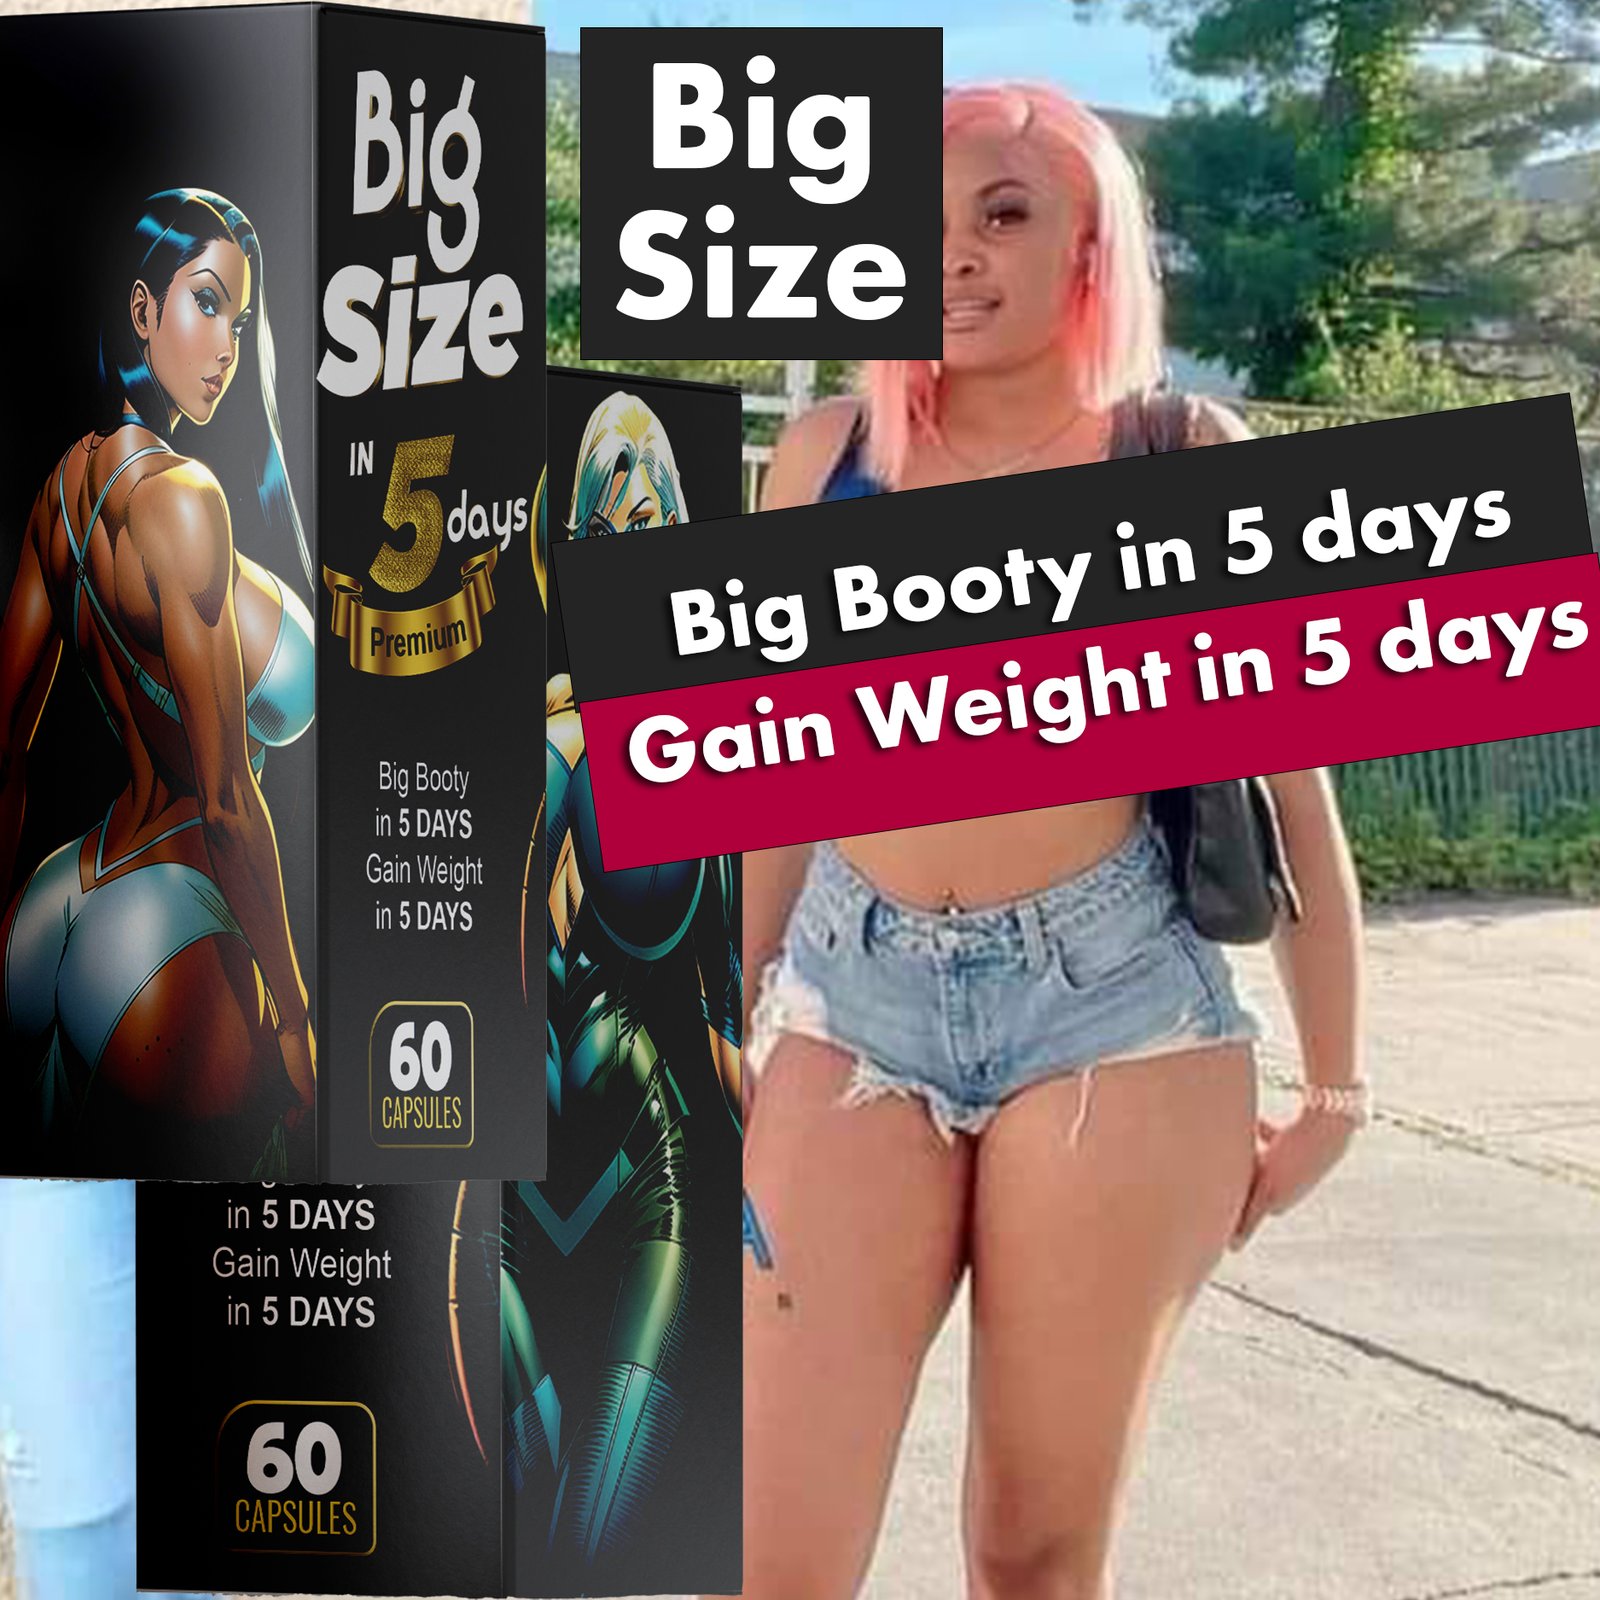 Big Size in 5 Days